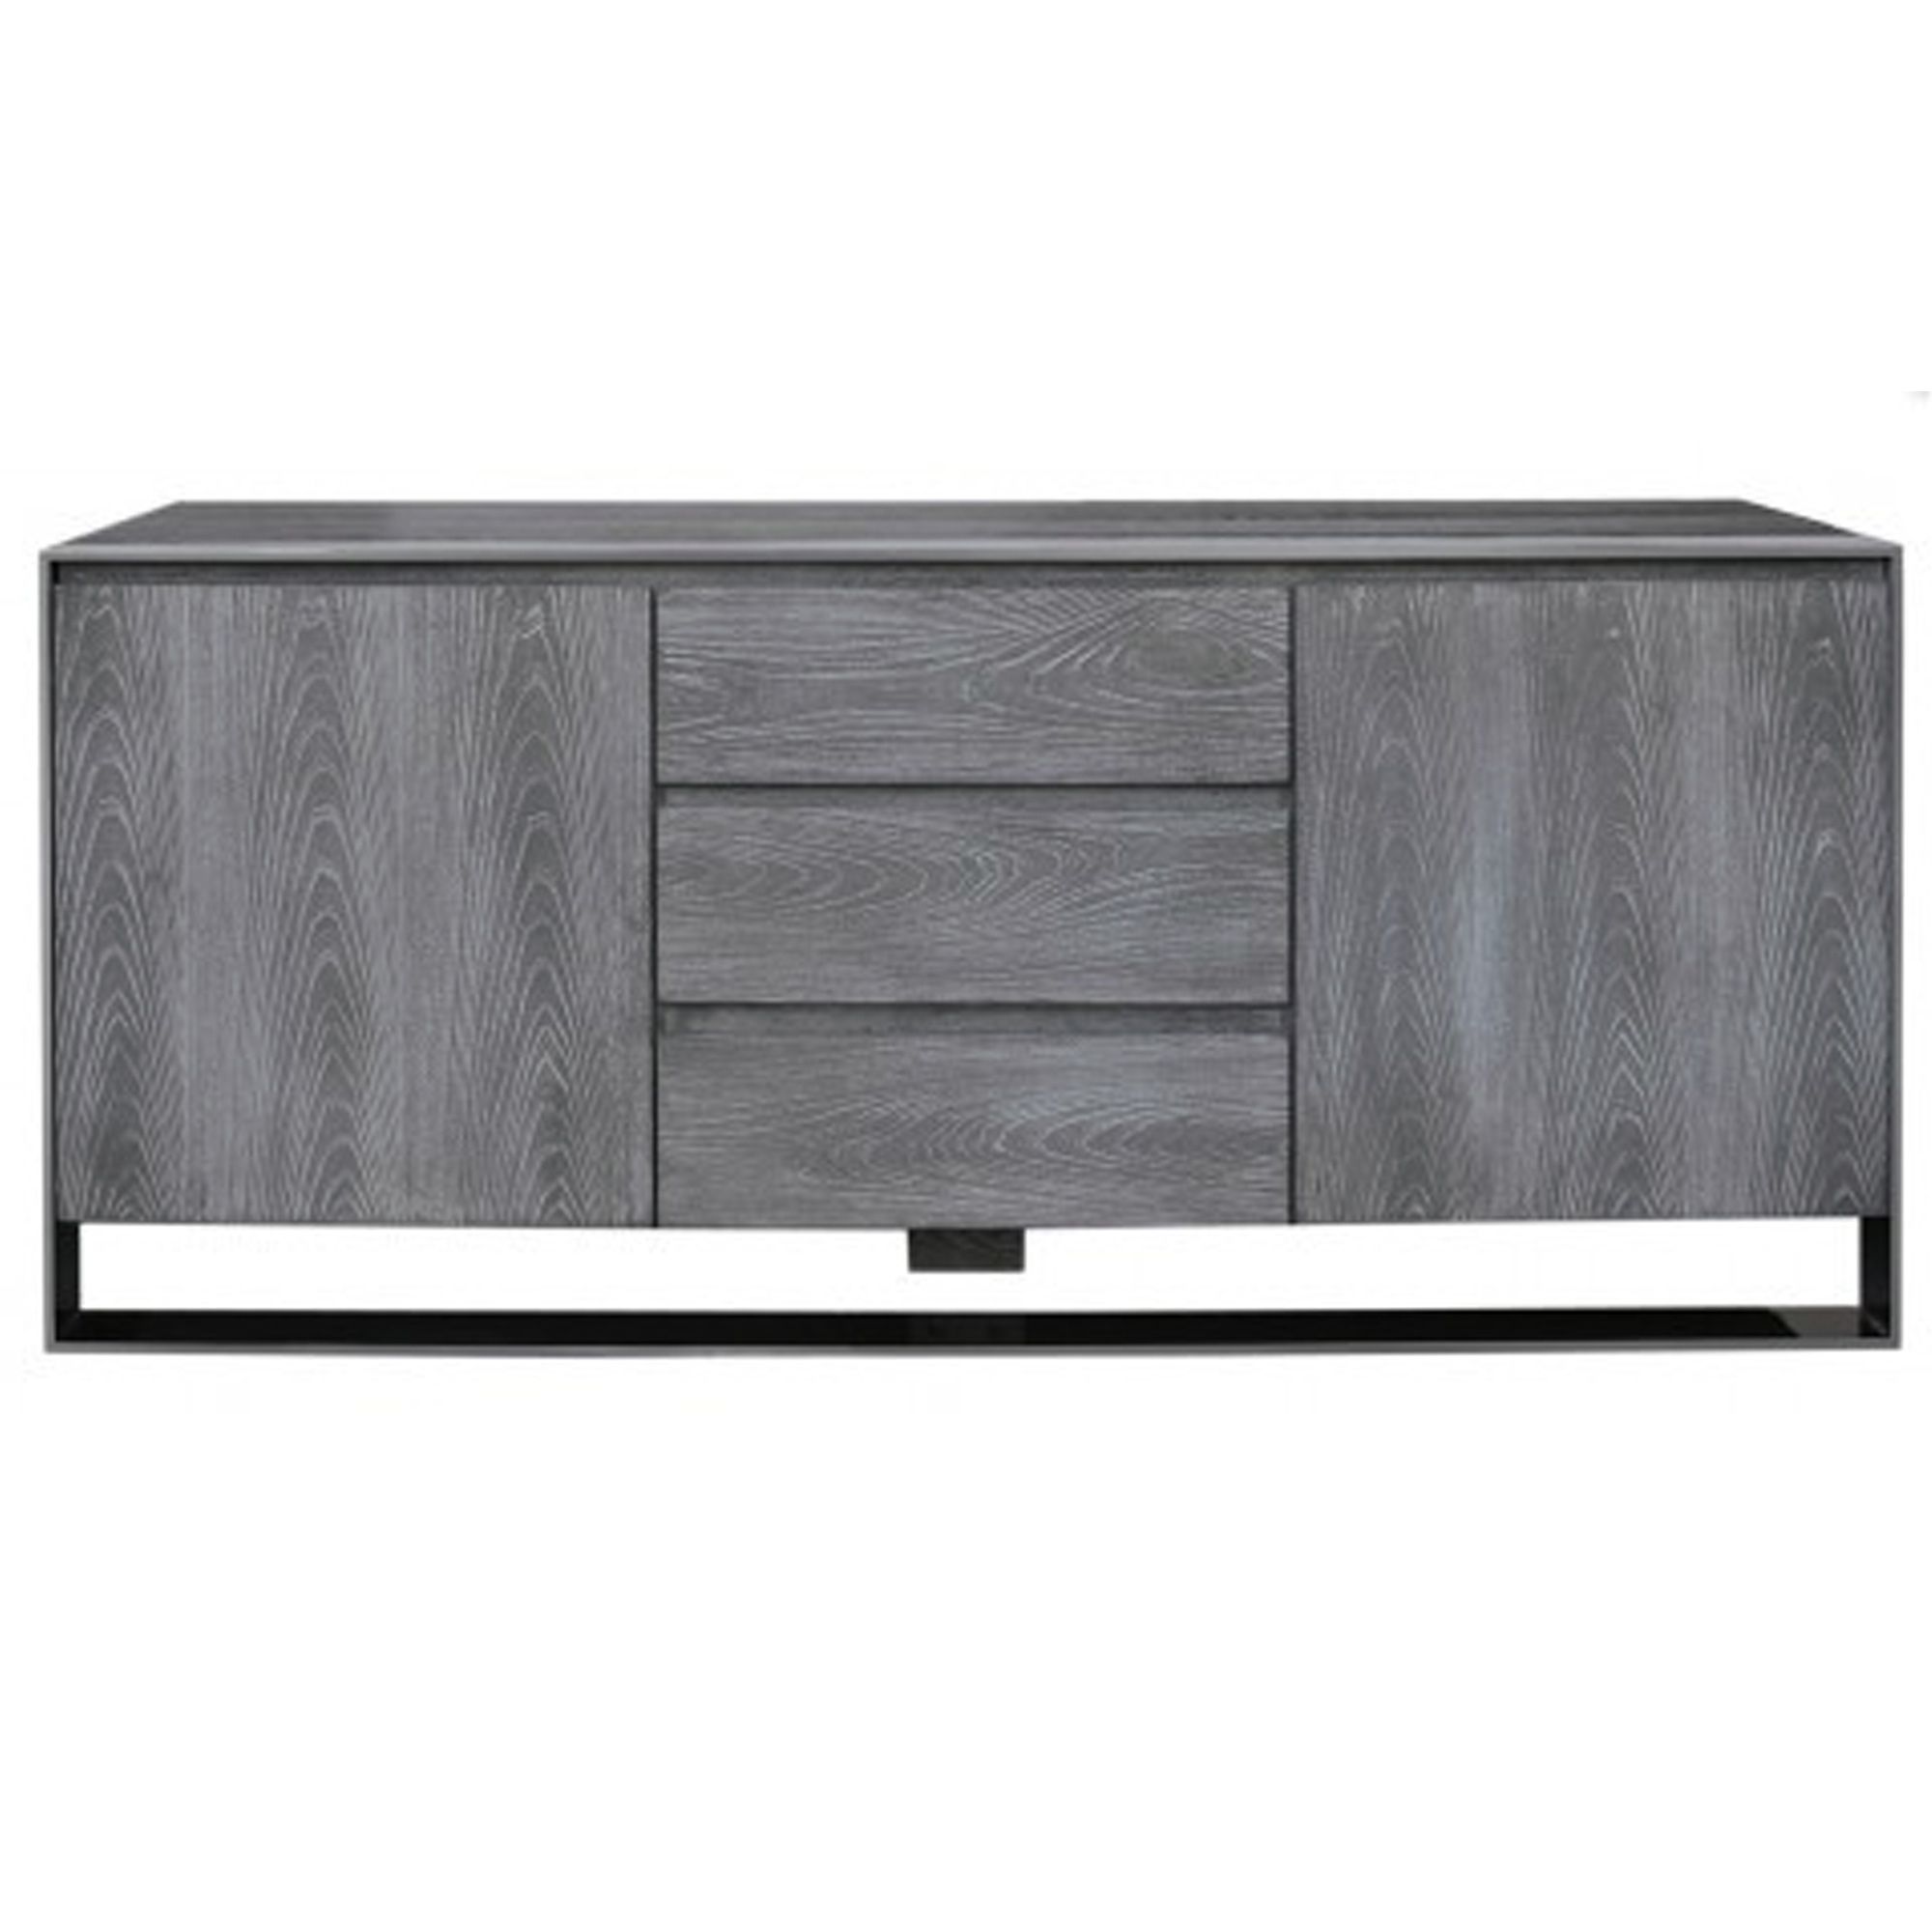 Grey Wooden Sideboard | Wooden Furniture | Sideboards Pertaining To Gray Wooden Sideboards (View 3 of 15)